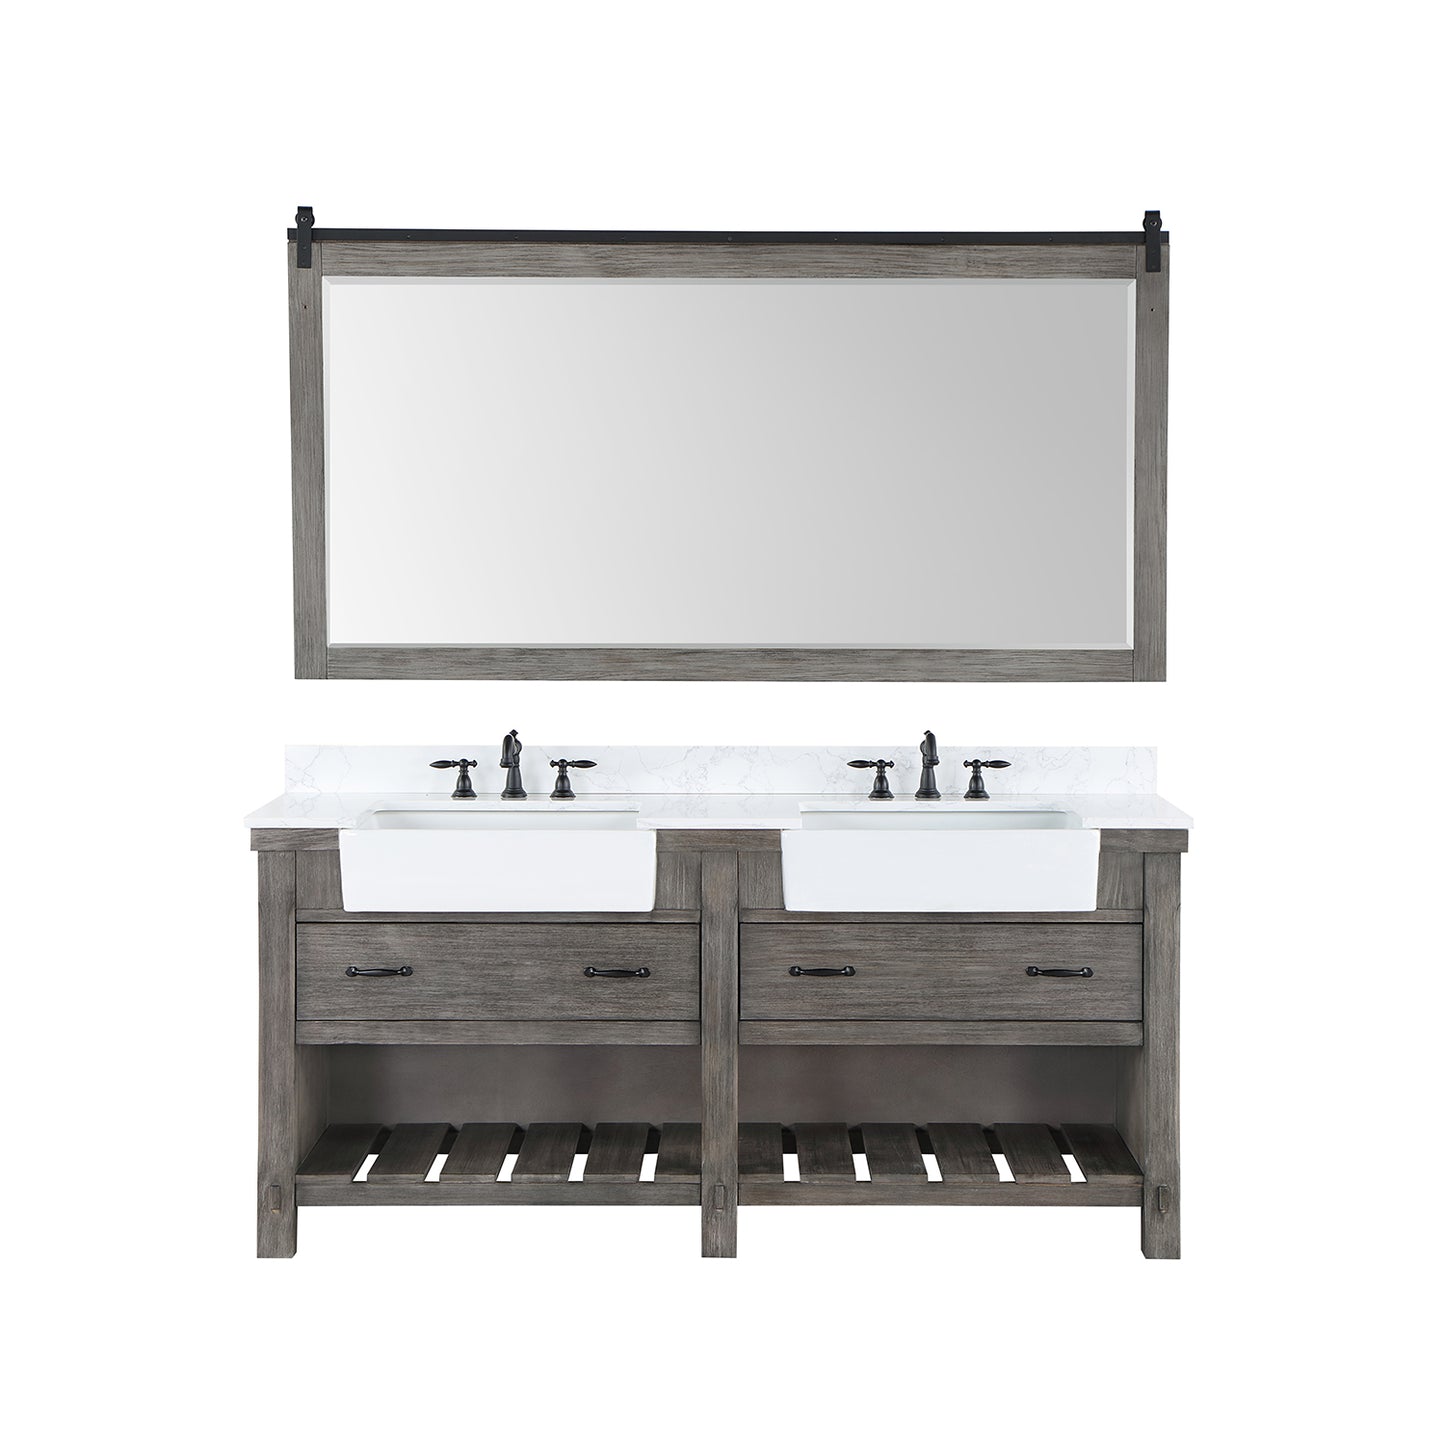 Villareal 72" Double Bath Vanity in Classical Grey with Composite Stone Top in White, White Farmhouse Basin and Mirror